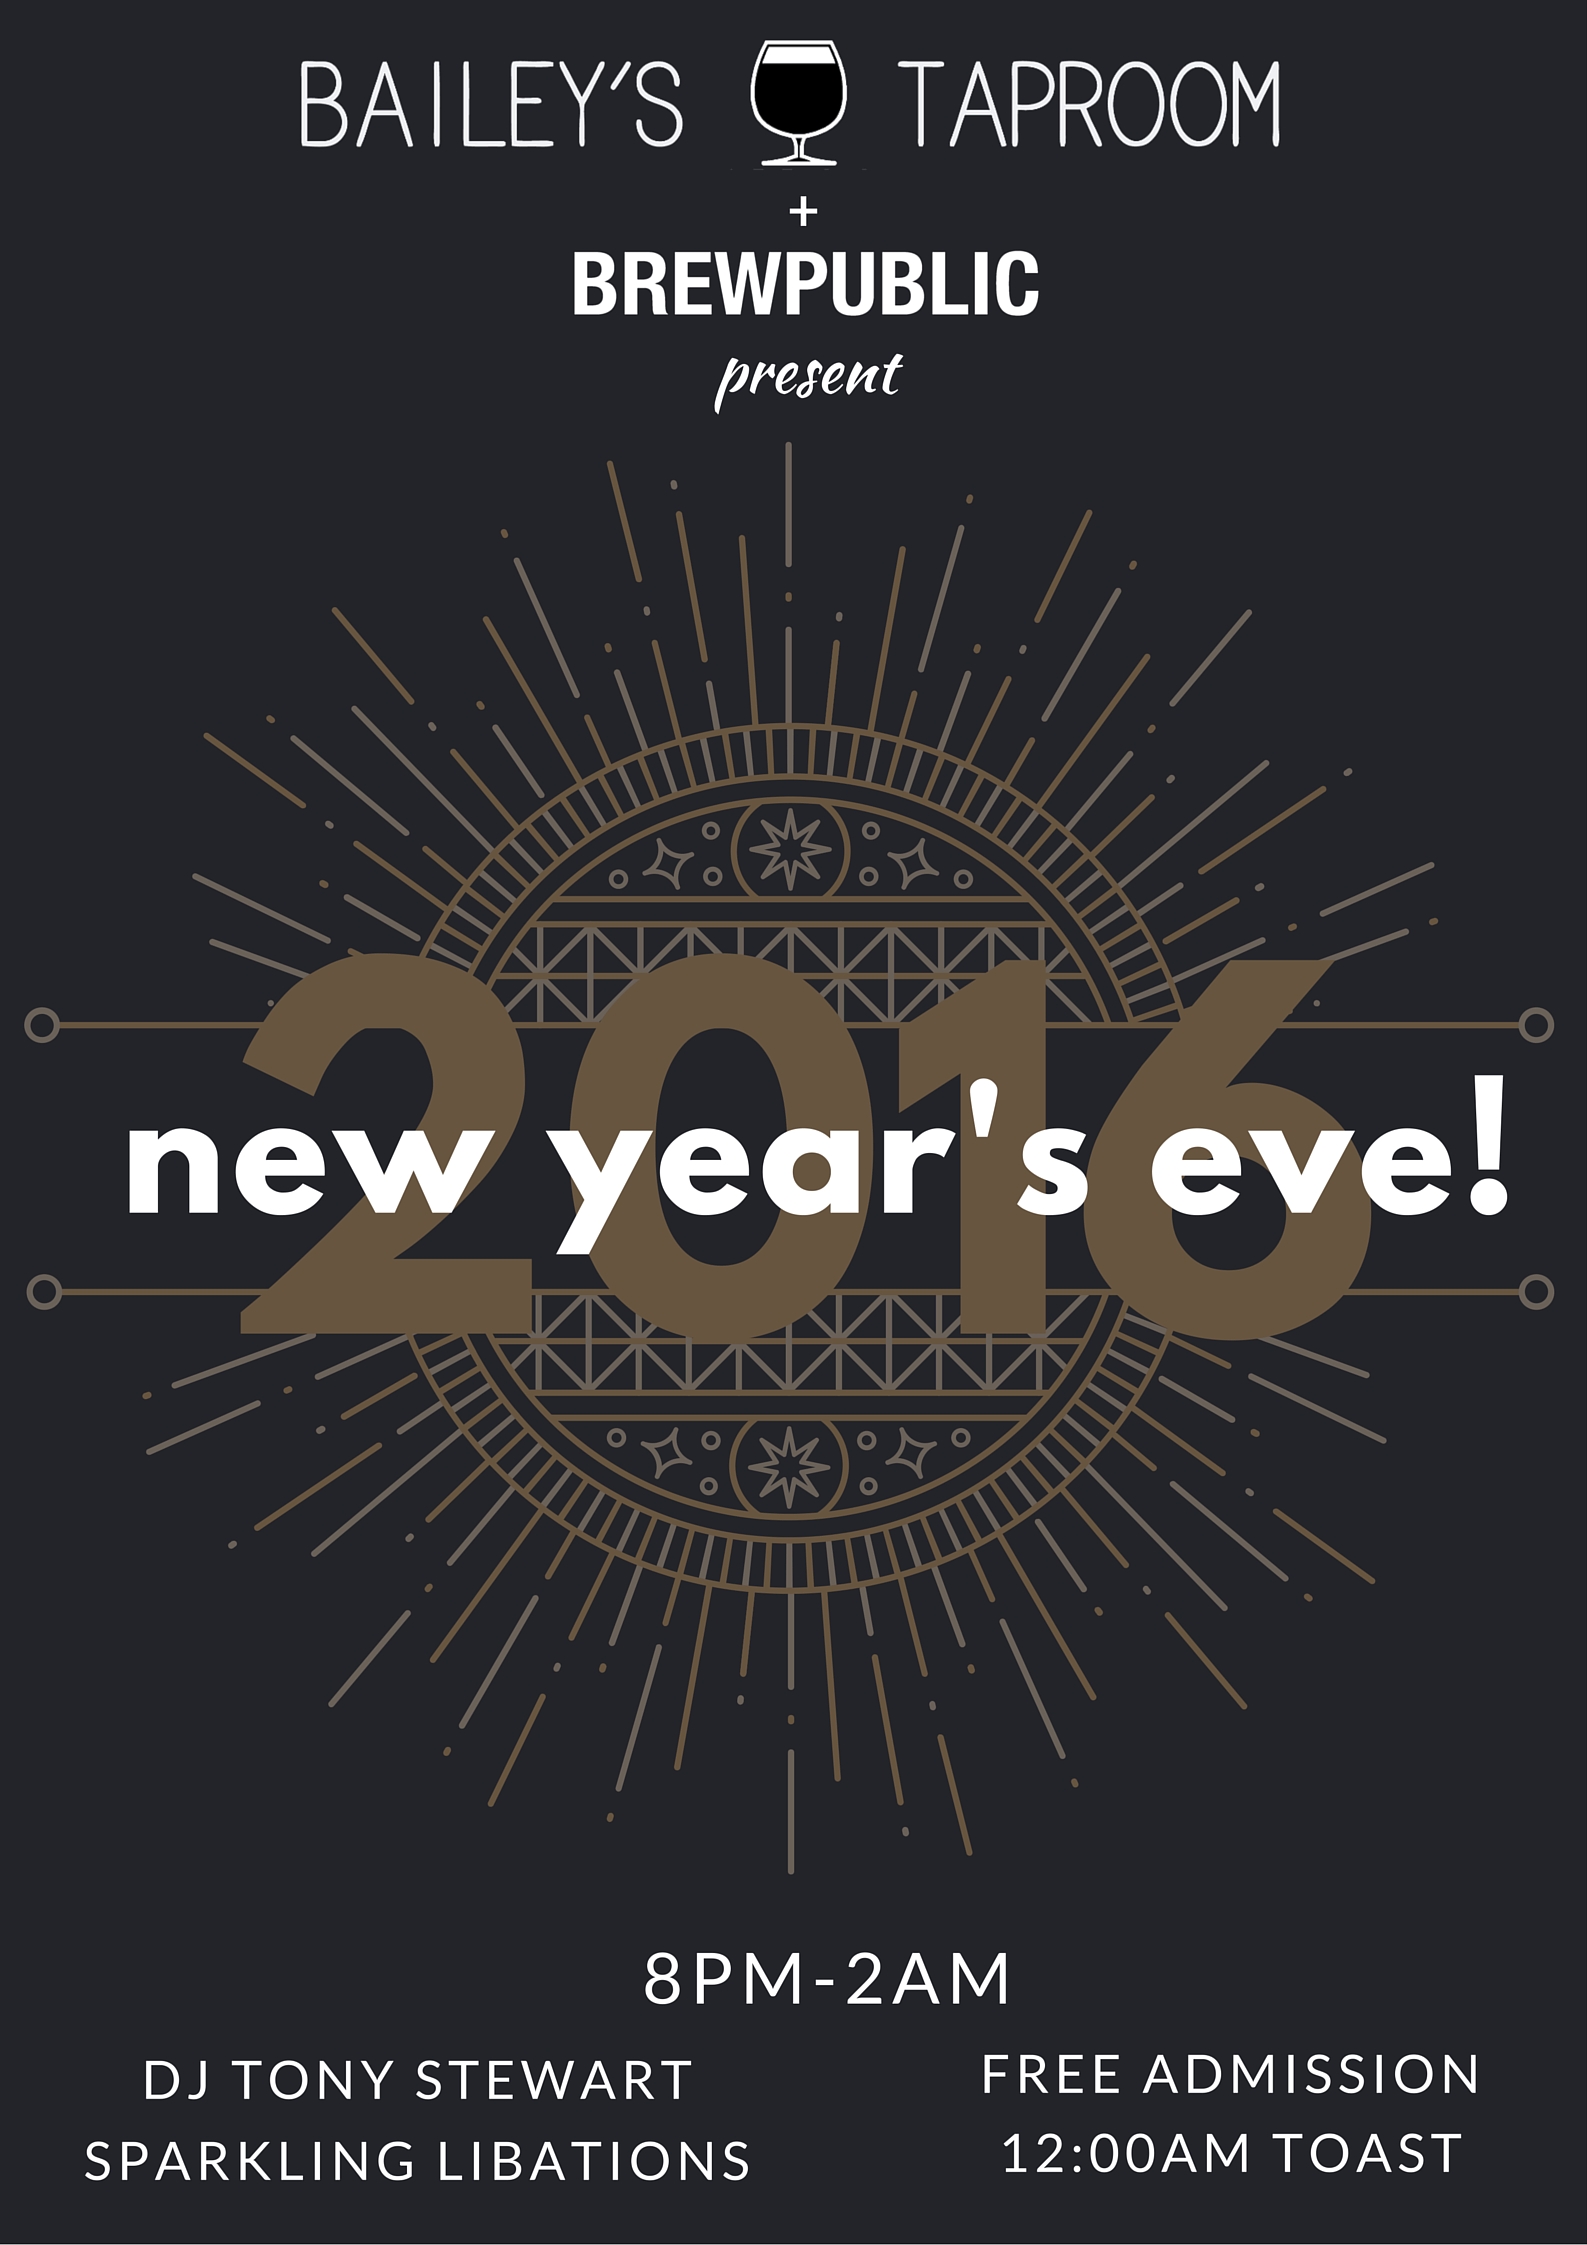 New Year's Eve with Brewpublic and Bailey's Taproom!